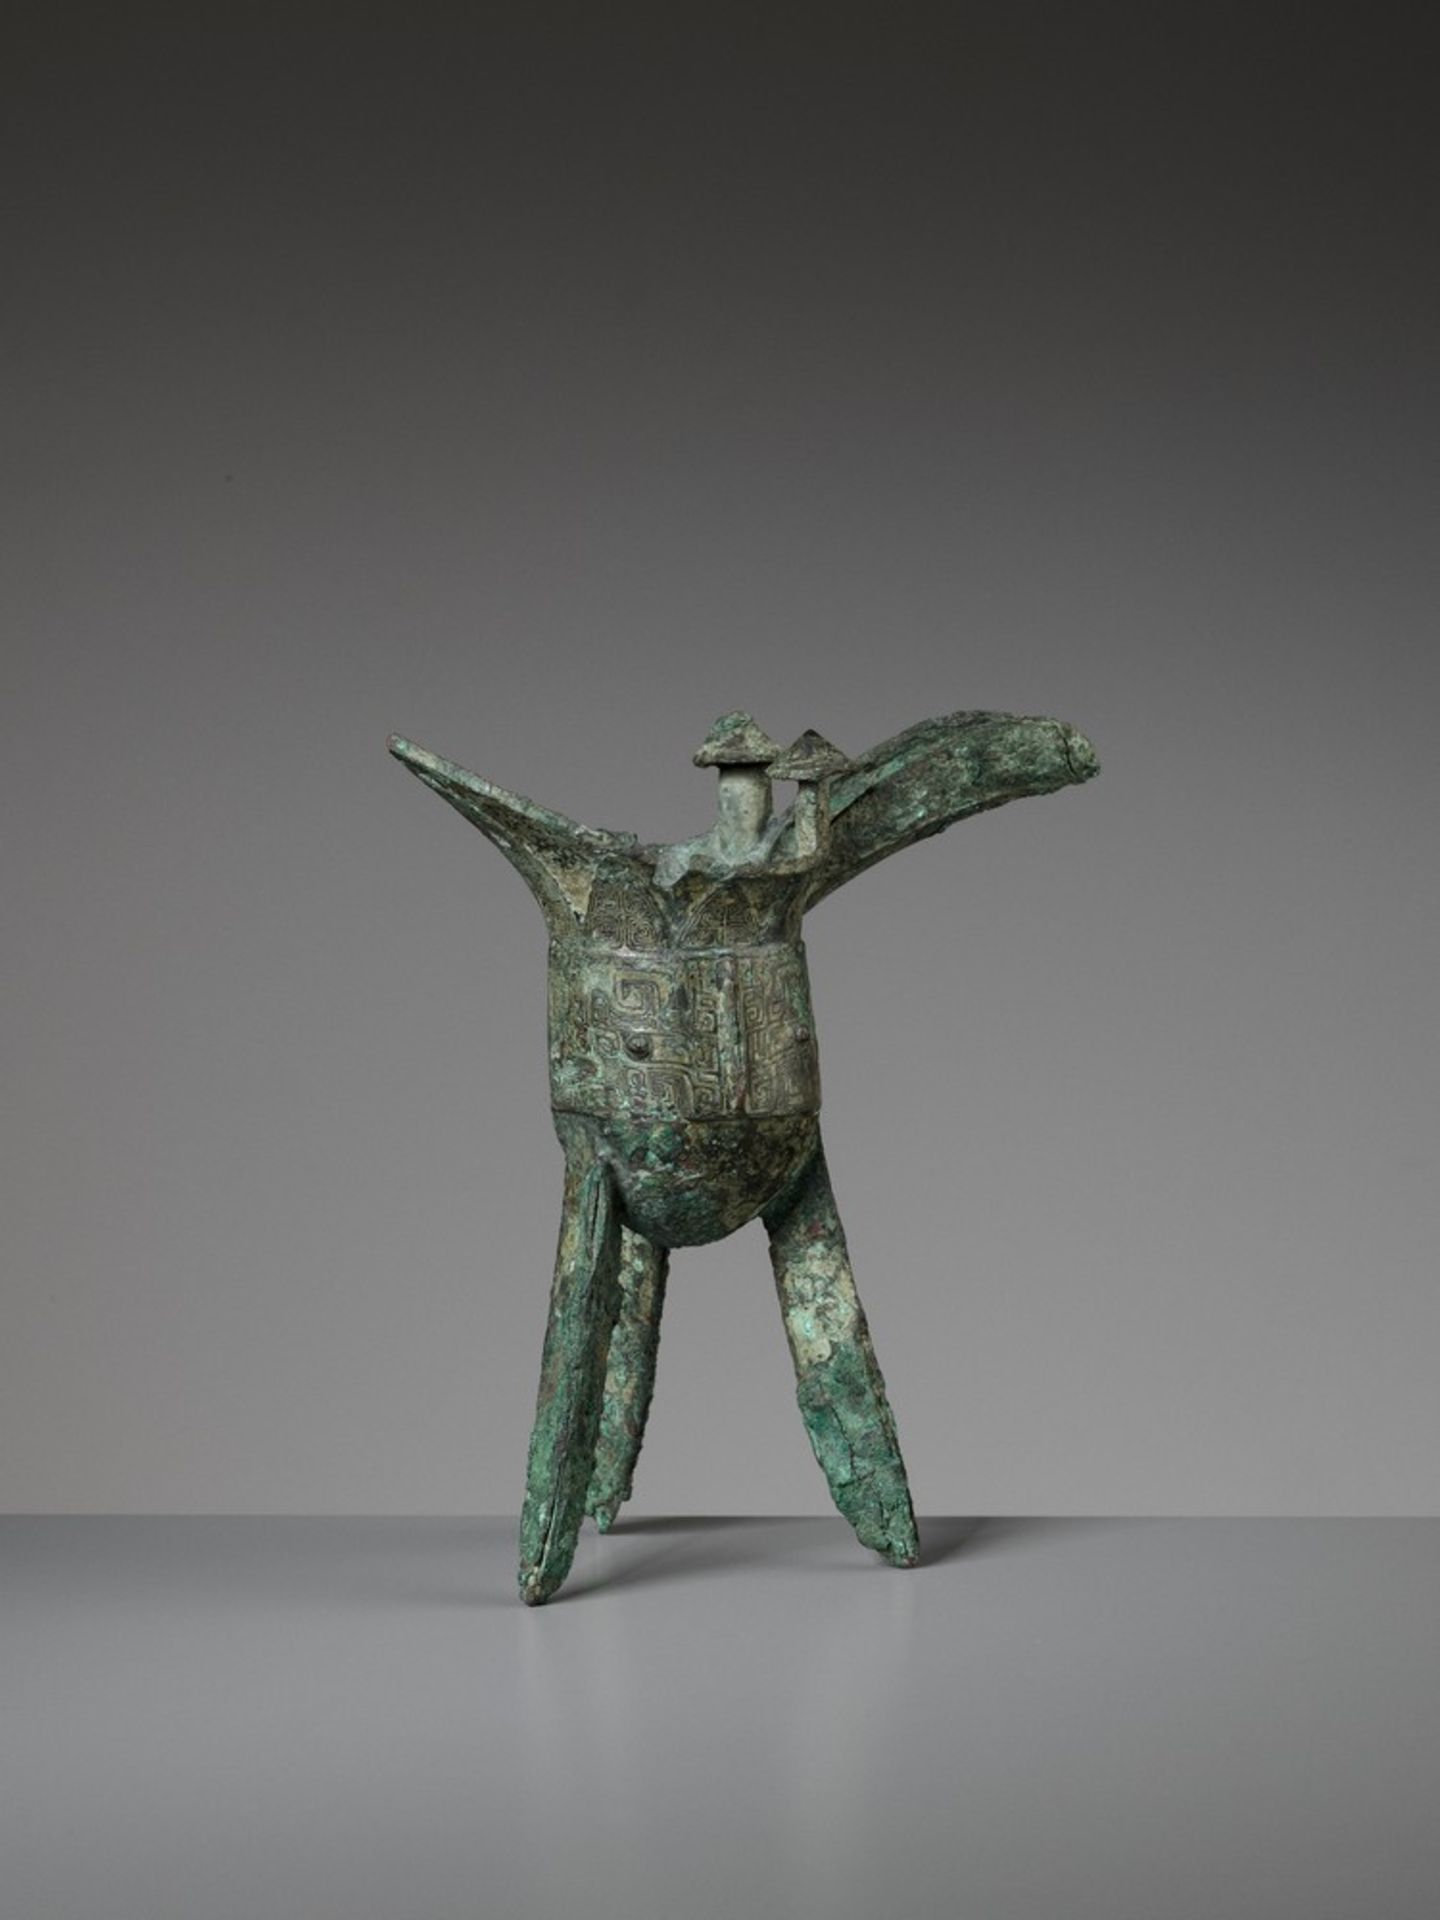 AN ARCHAIC BRONZE RITUAL WINE VESSEL, JUE, SHANG DYNASTY - Image 6 of 15